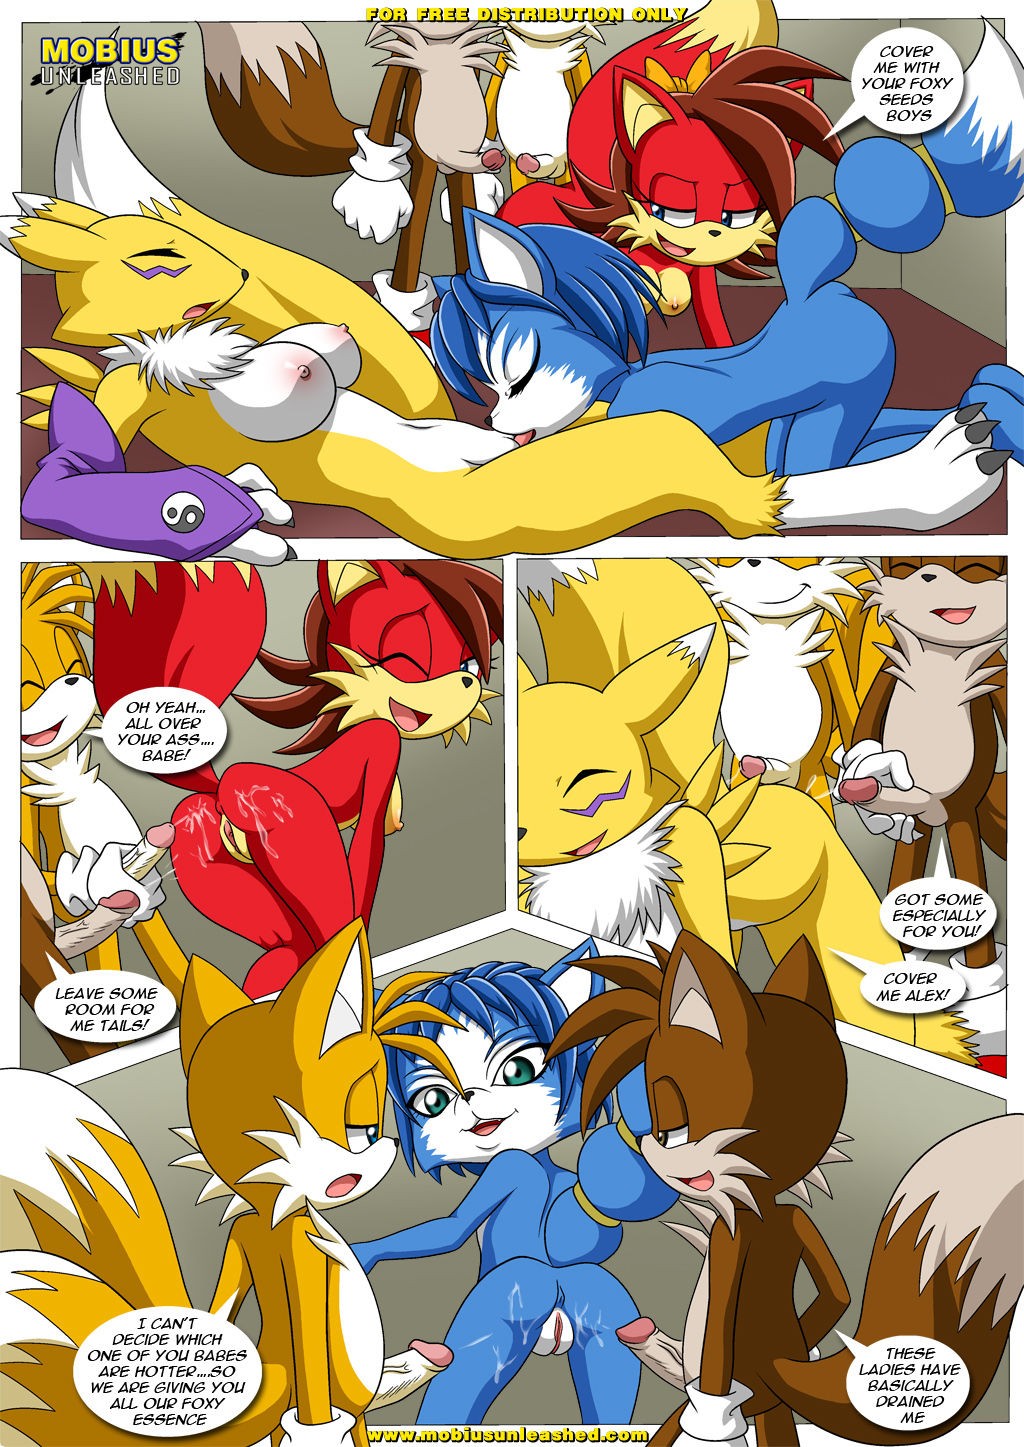 FoXXXes 2: 2 Much Tail porn comic picture 9